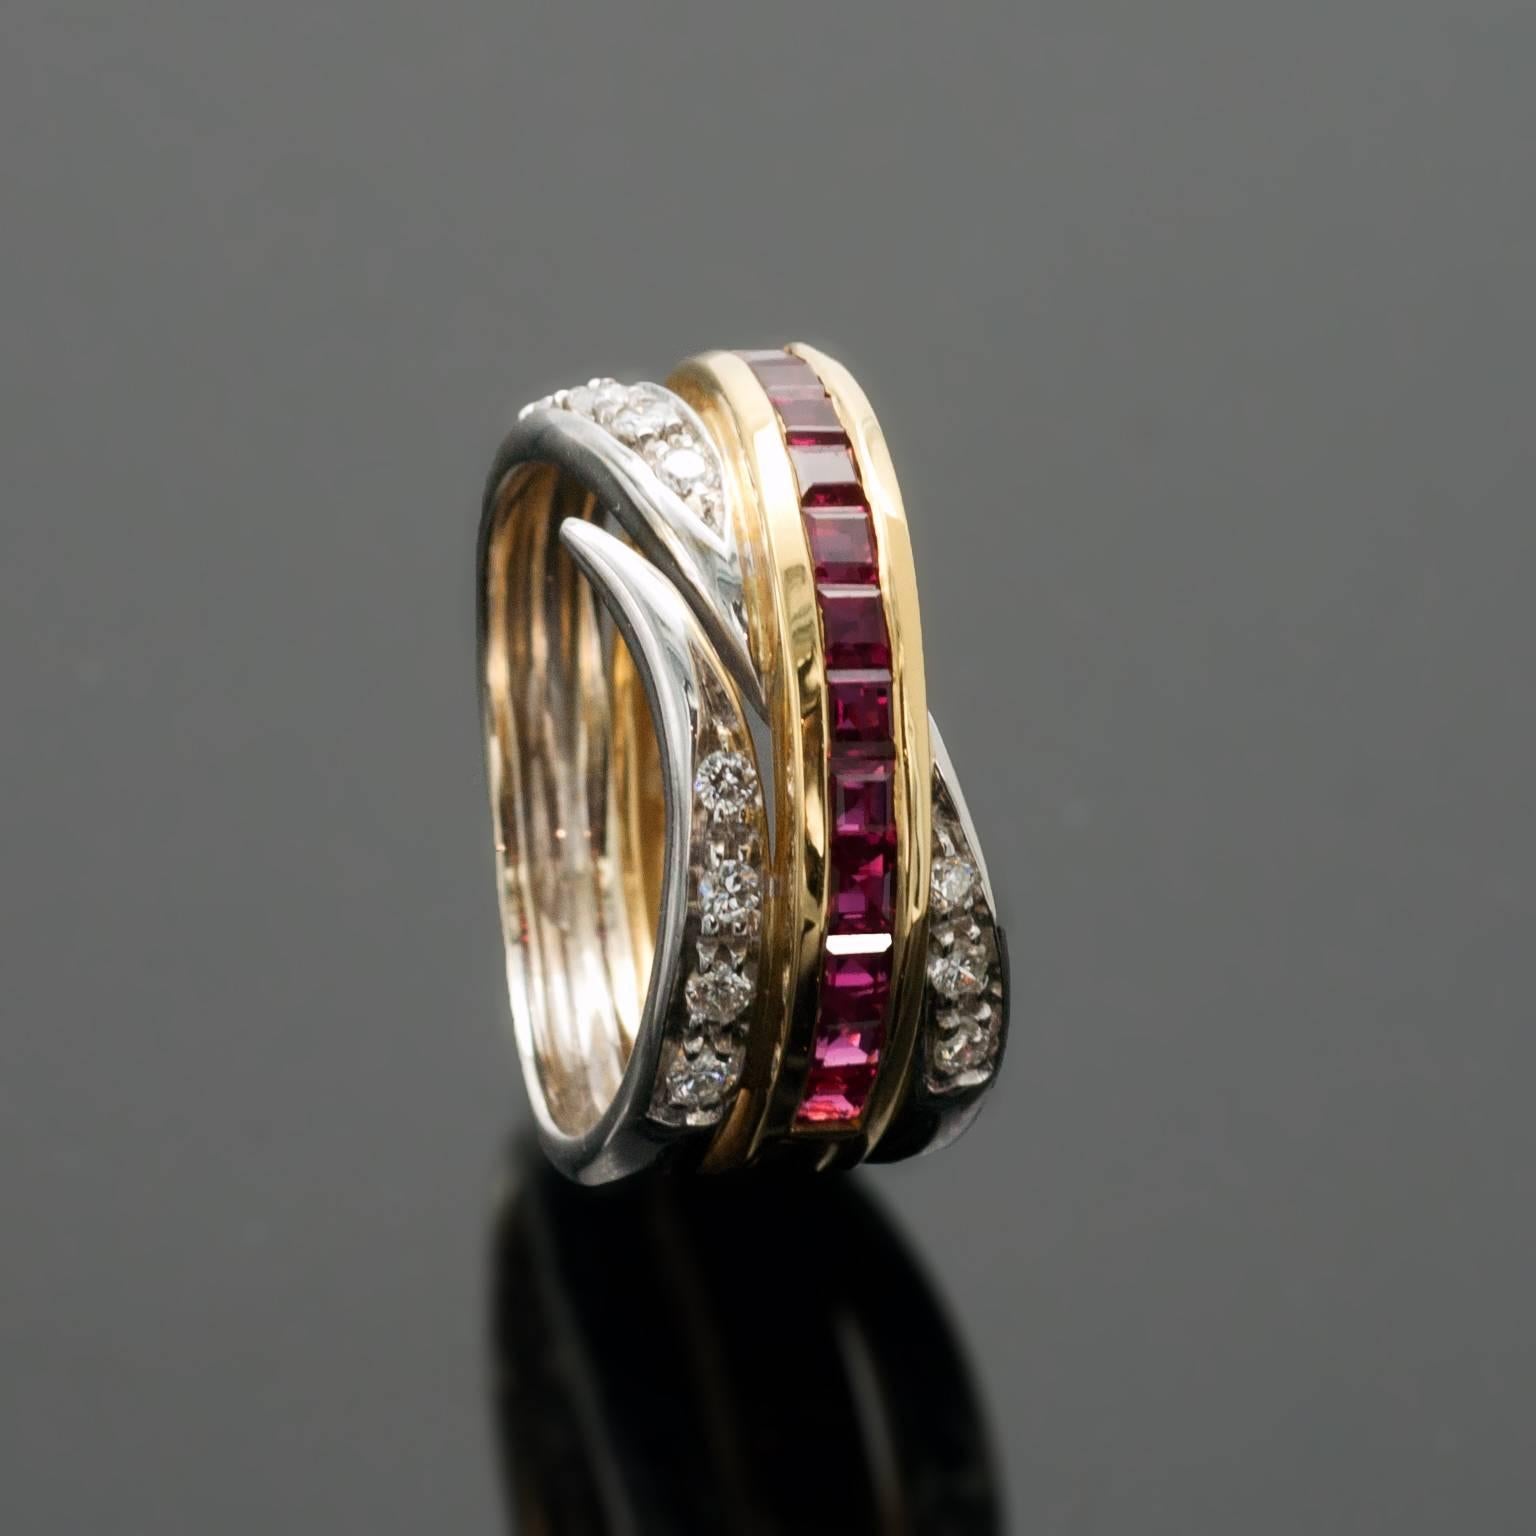 This band ring gracefully wraps around the finger. A line of square rubies are set in yellow gold while round brilliant cut diamonds  are set in 18KT white gold.

Total diamond weight approx: 0.25 ctw
Total Ruby weight approx: 1.25 ctw